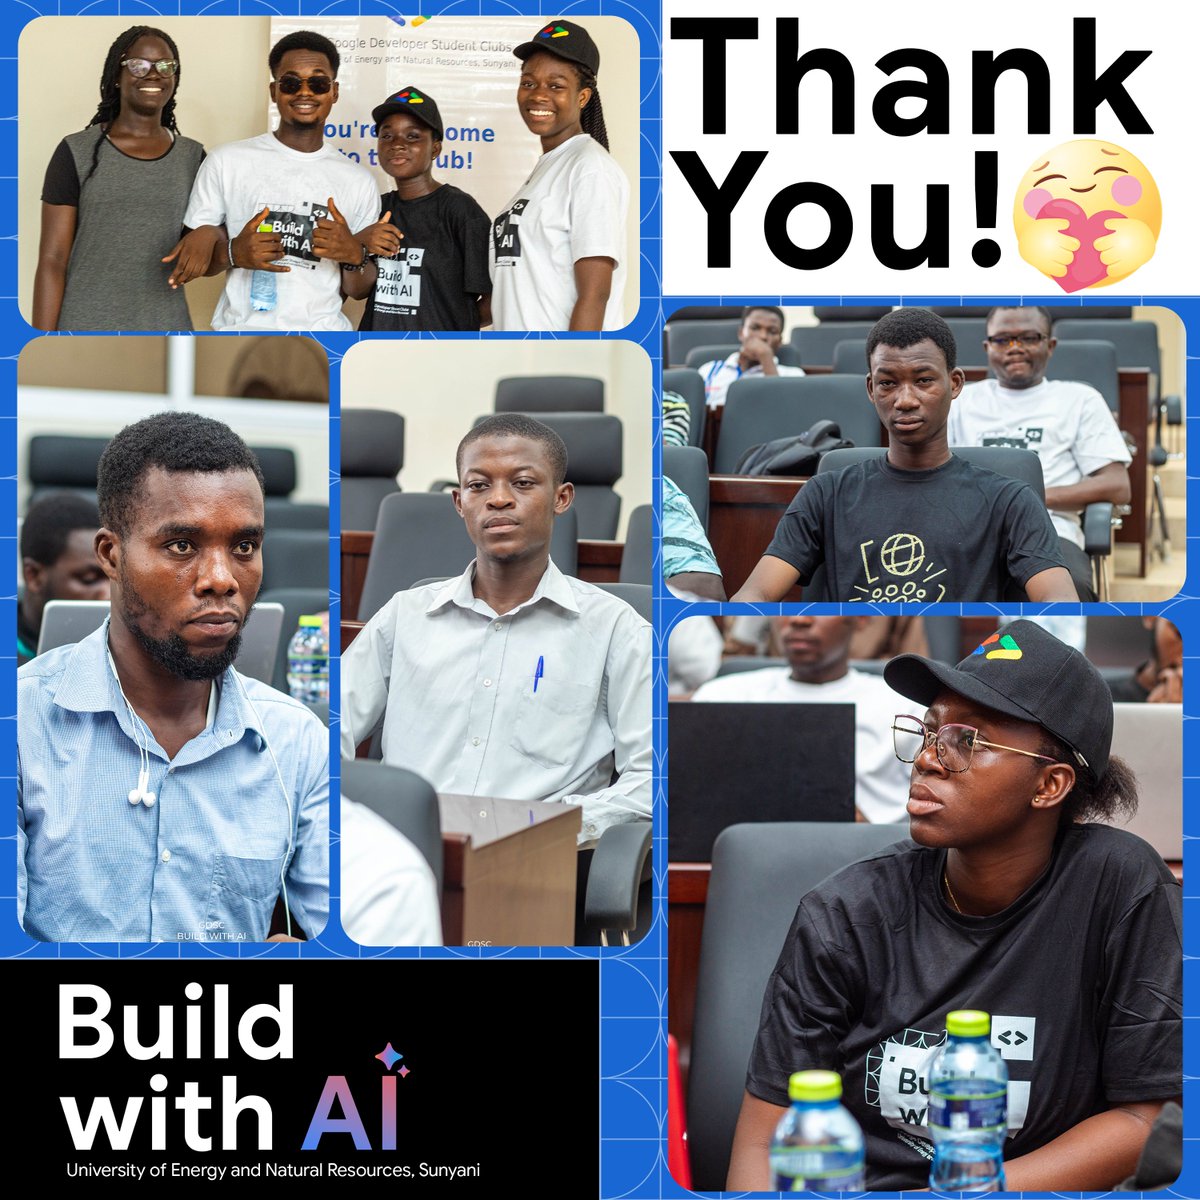 Y'all made this possible❤️🥹

Thank you!❤️
Unto the next!🚀

#BuildWithAI #BuildwithAIUENR #Gemini
#gdsc_uenr #gdscSSA #developerstudentclubs
#uenrishome #uenr